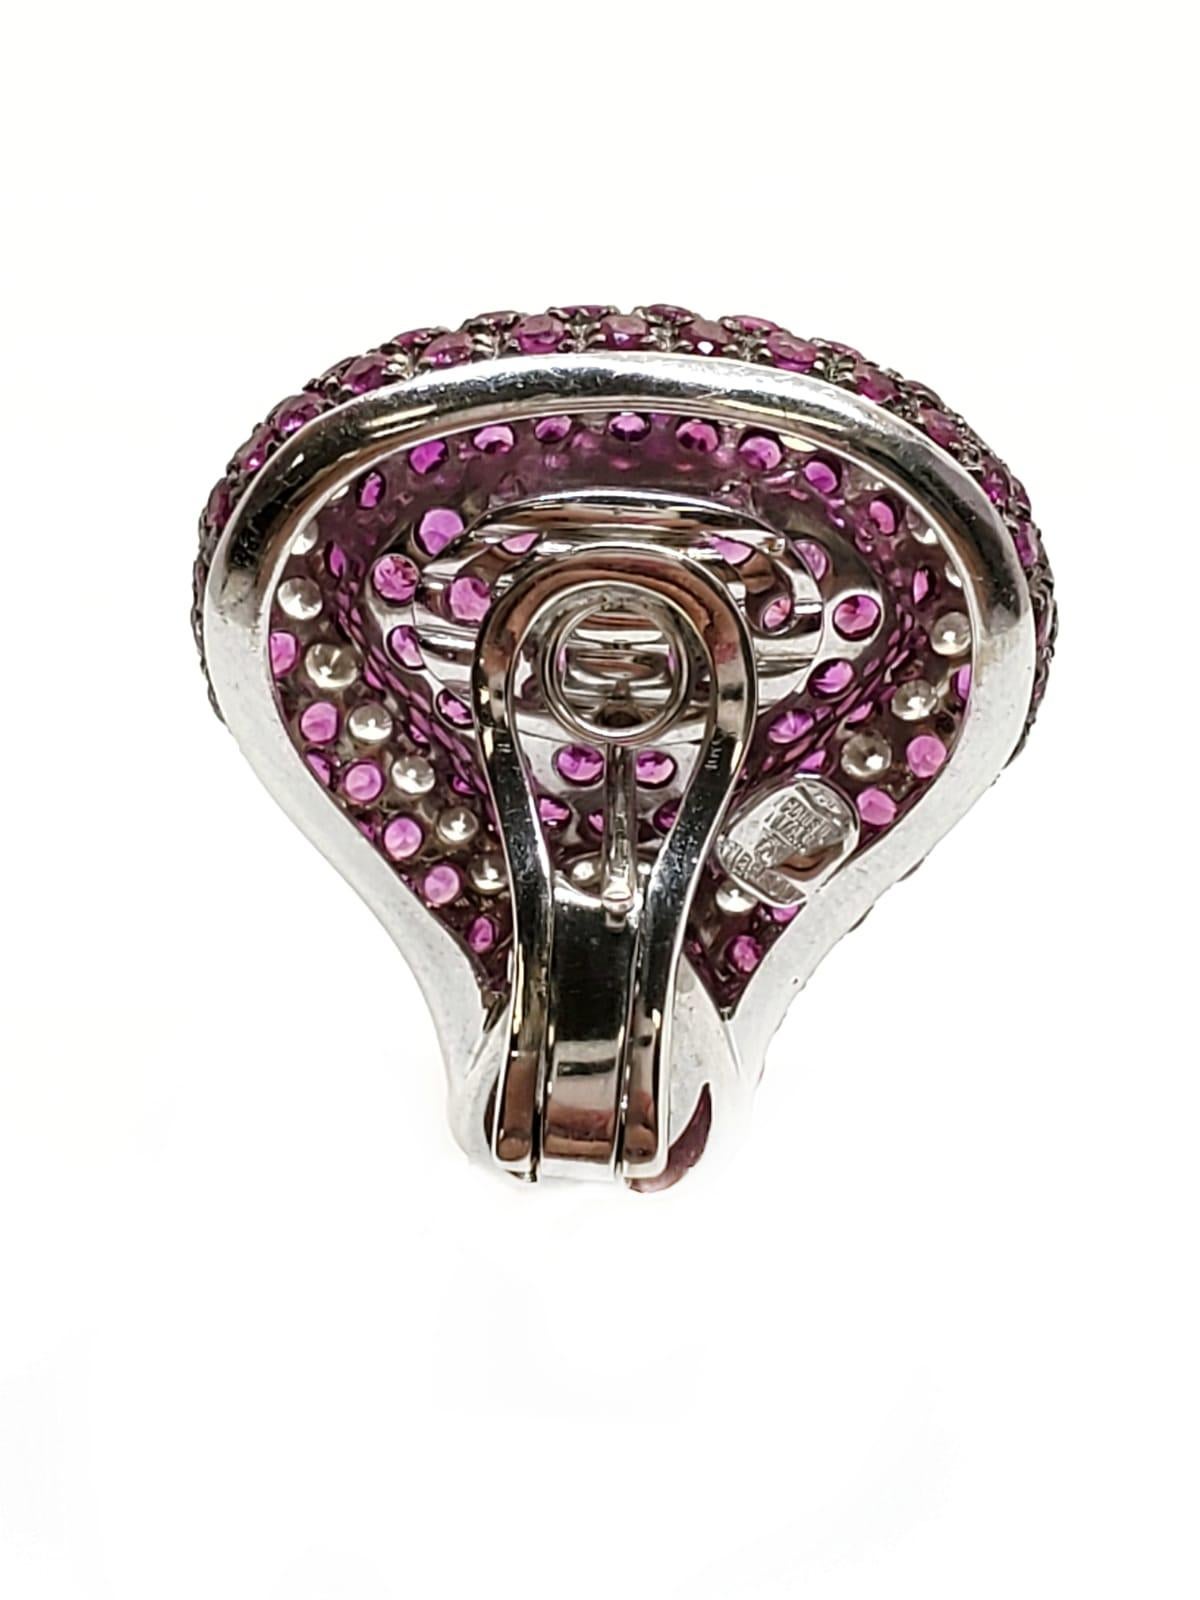 Andreoli Pink Sapphire Diamond on Ear Clip Earrings 18 Karat Gold Blackened In New Condition For Sale In New York, NY